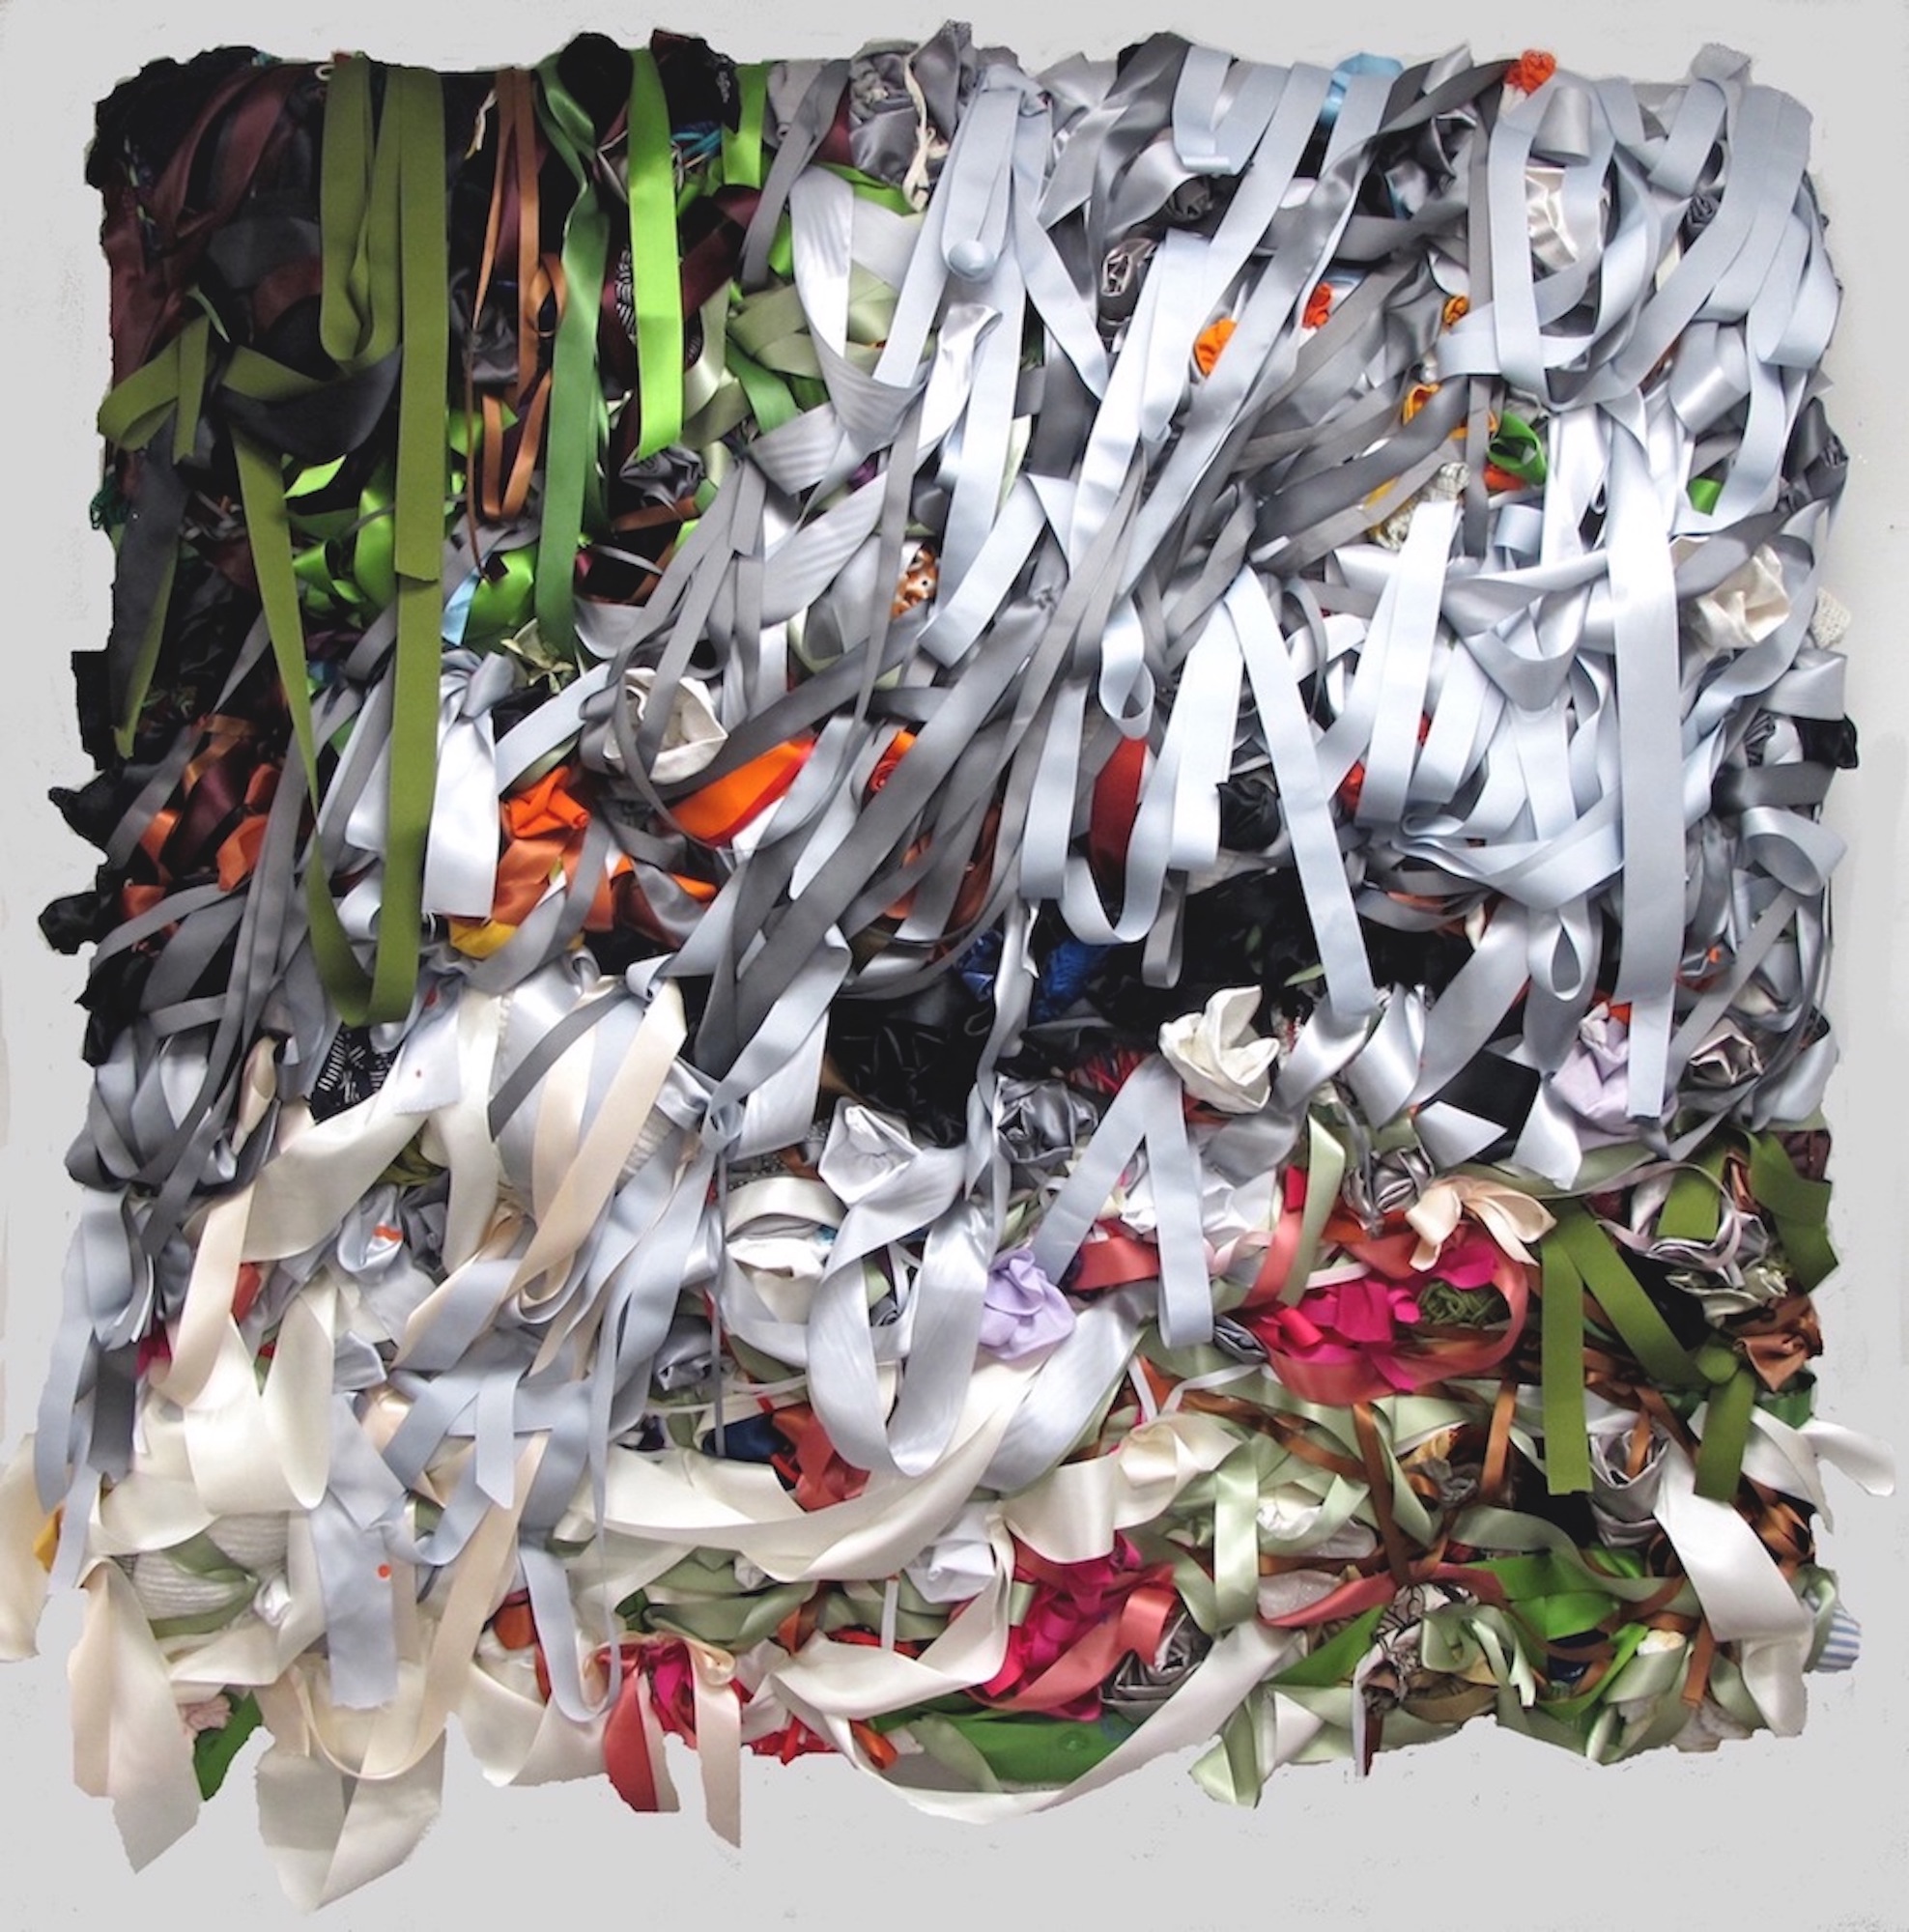 A mass of silver, green, red, and black ribbons together in a twisted mass